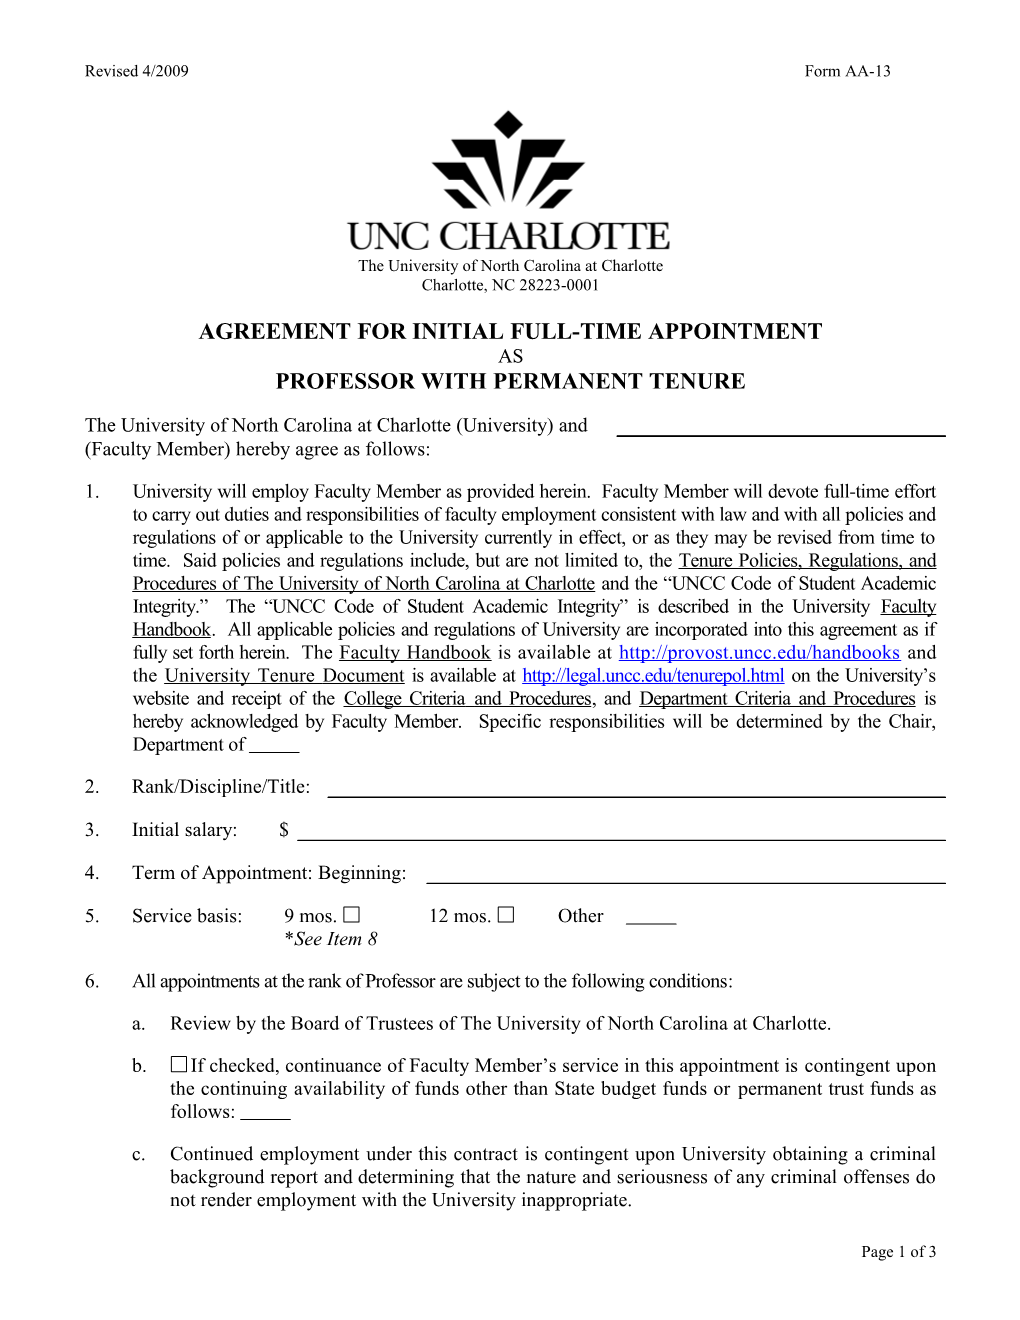 Agreement for Initial Full-Time Appointment As Professor with Permanent Tenure